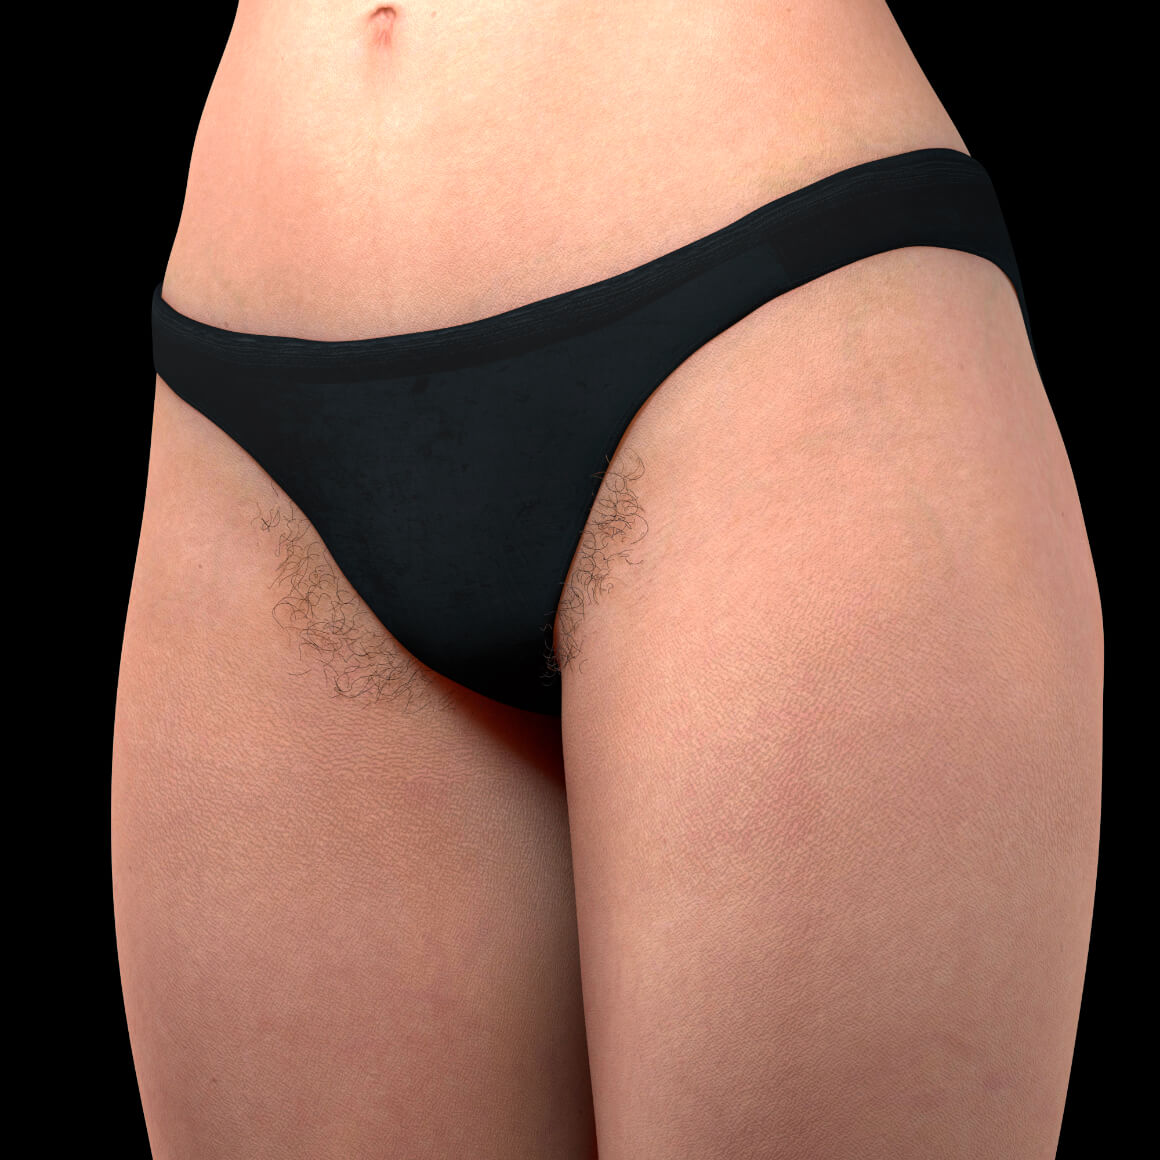 Angled Clinique Chloé female patient with unwanted hair in the bikini area